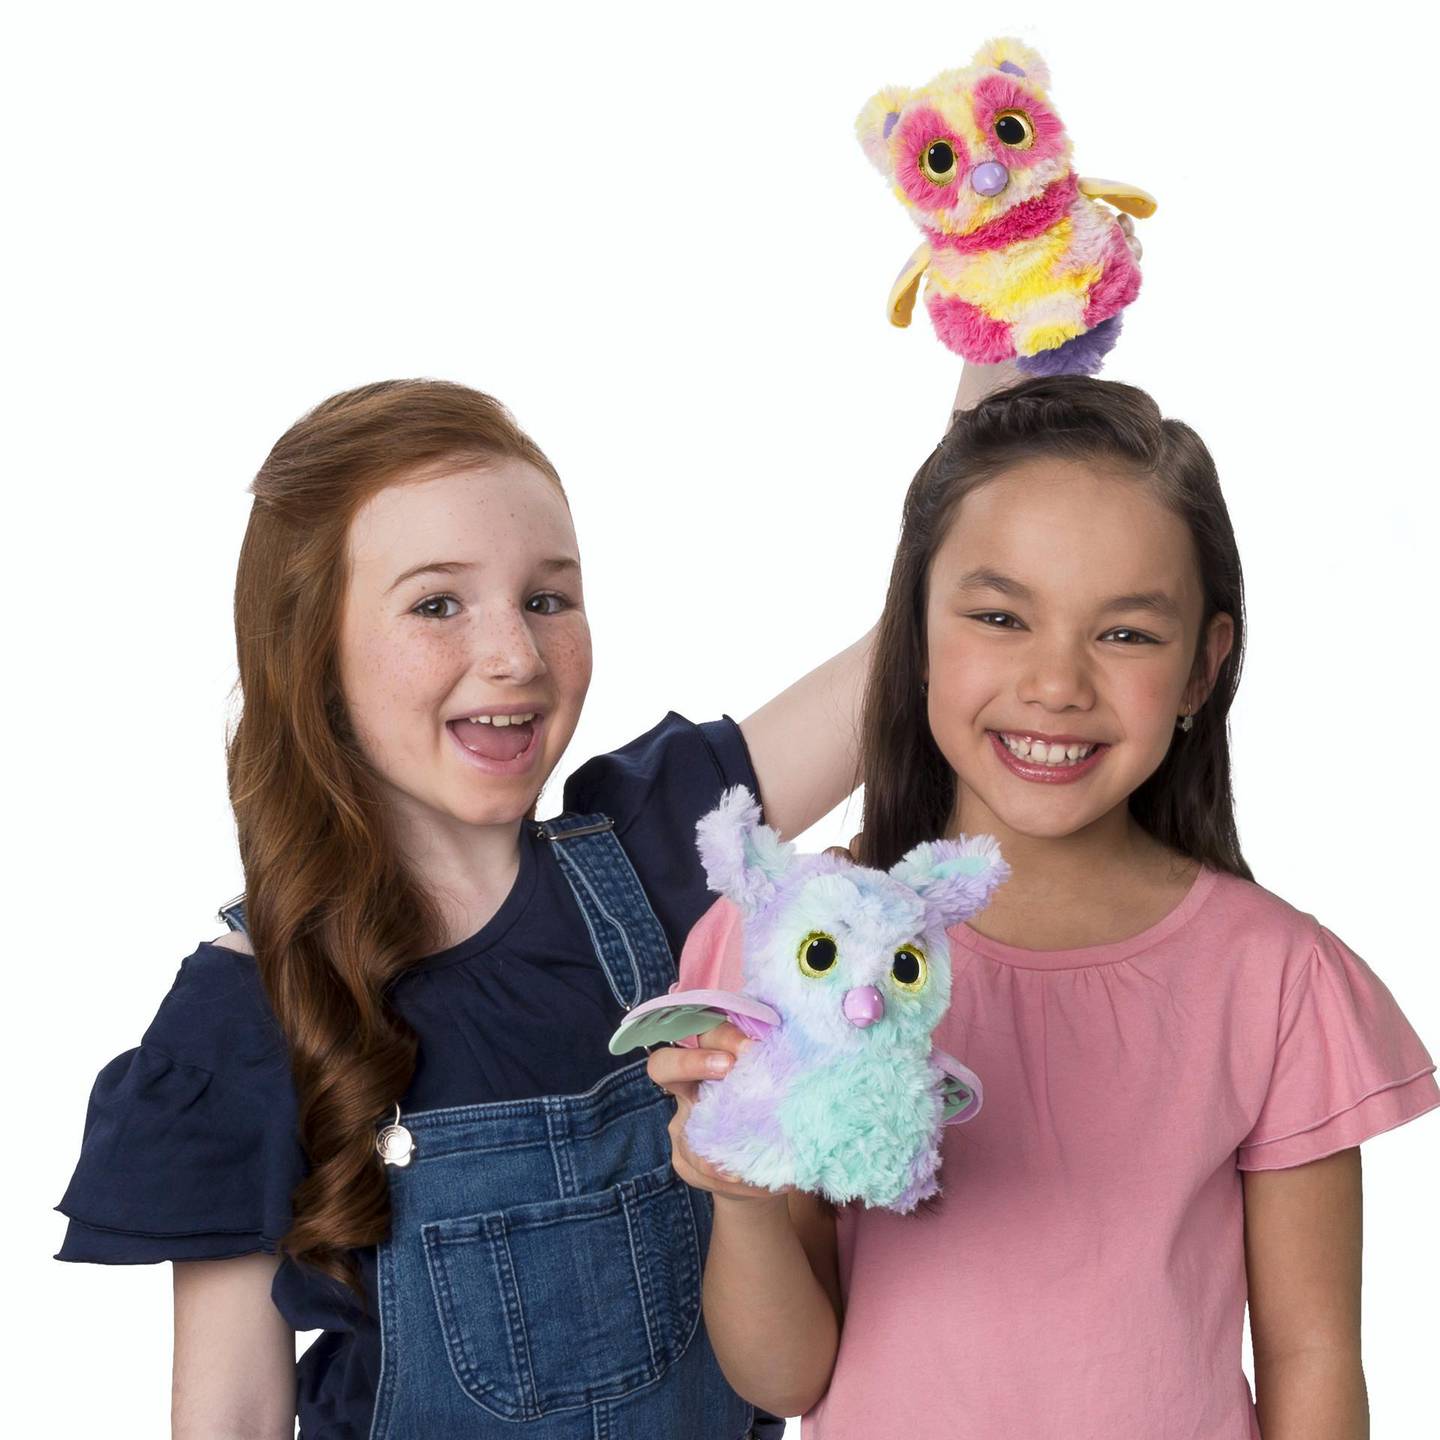 Hatchimals are stuffed birds that 'hatch' themselves into existence